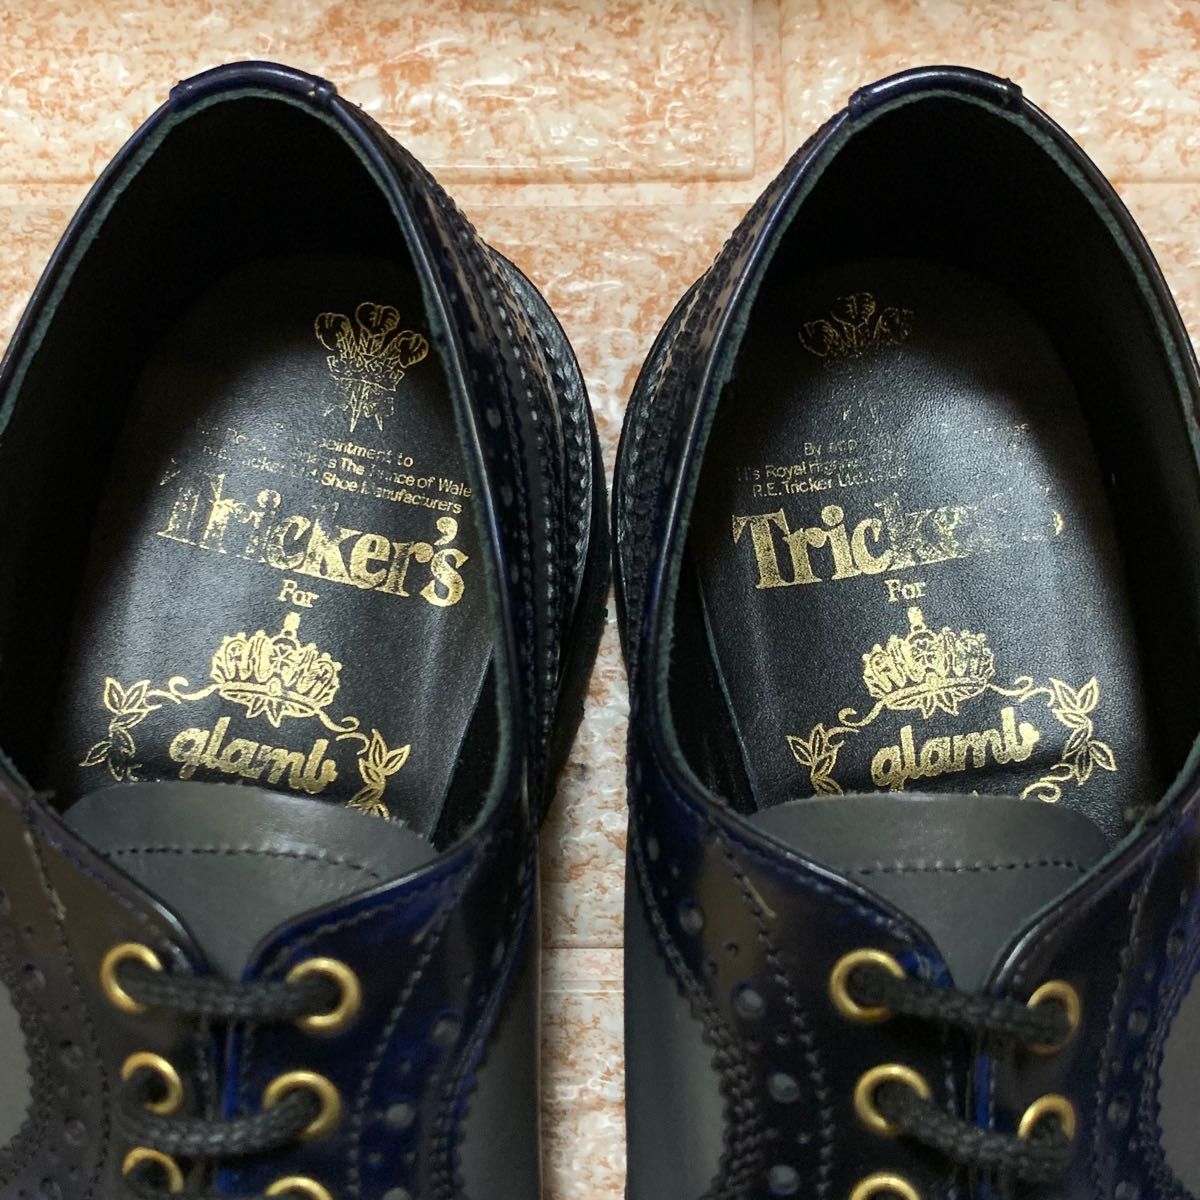 Lawrence shoes by Tricker's×GLAMB-